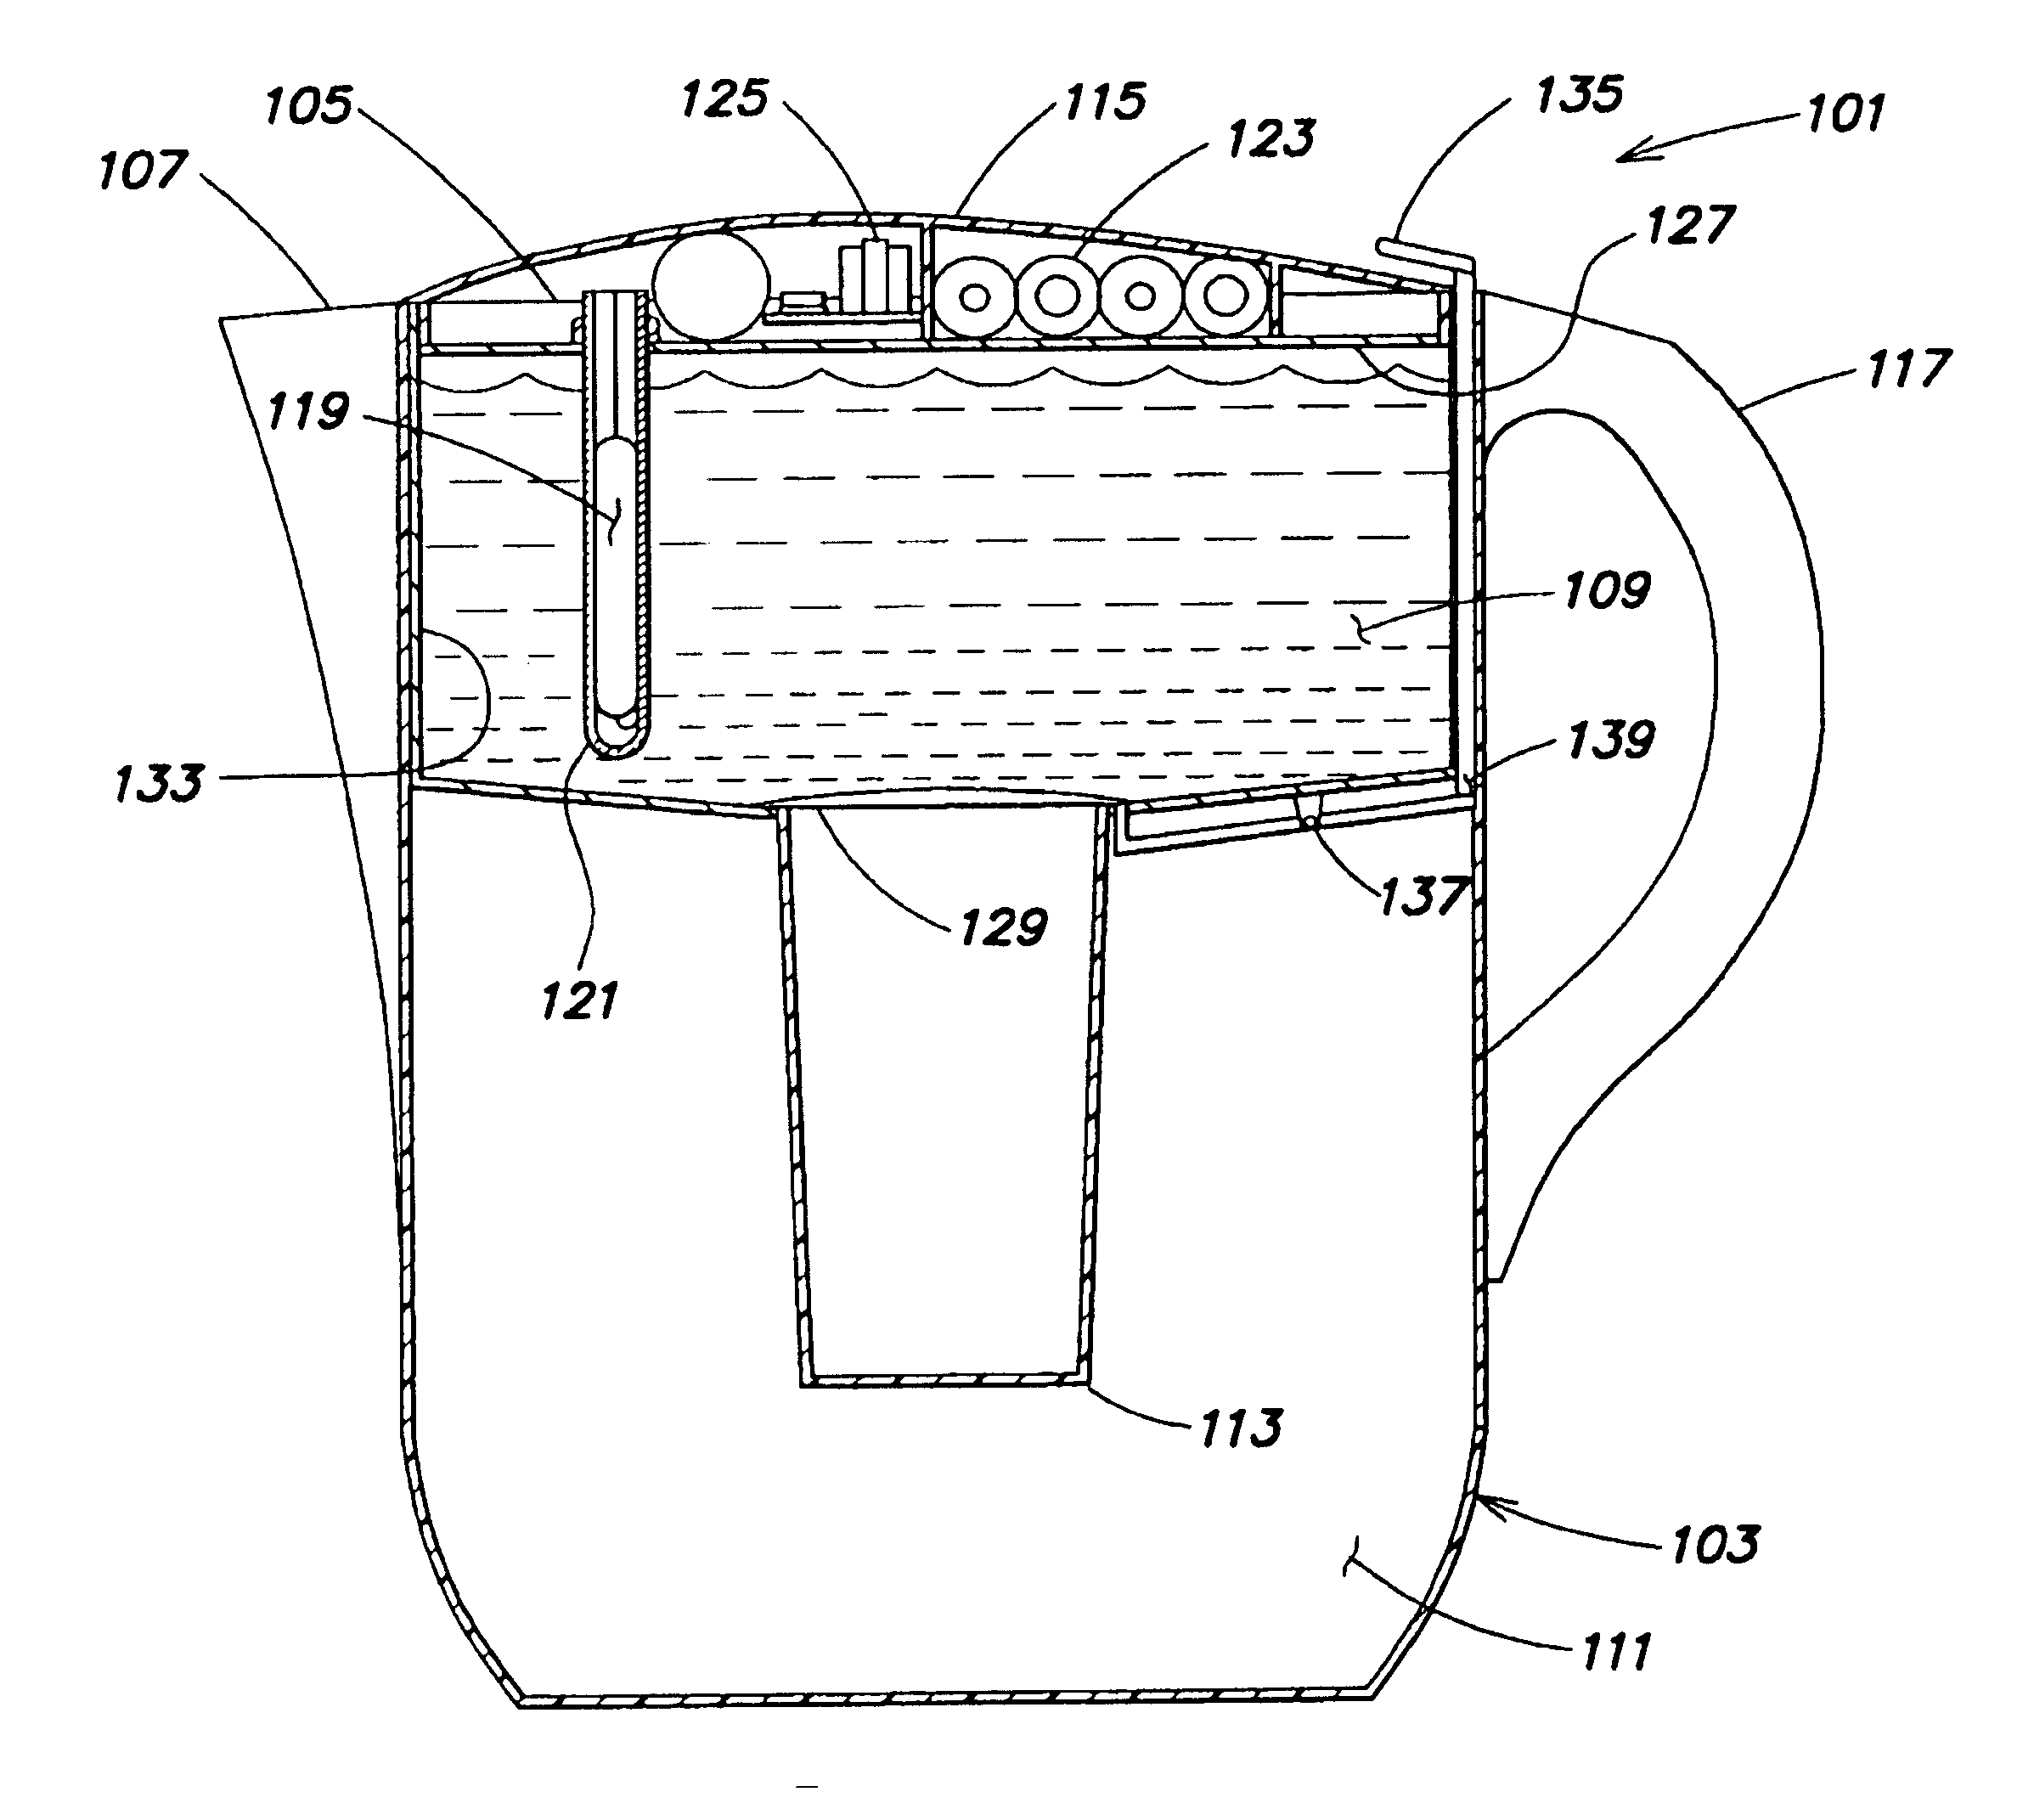 Methods and apparatus for the treatment of fluids